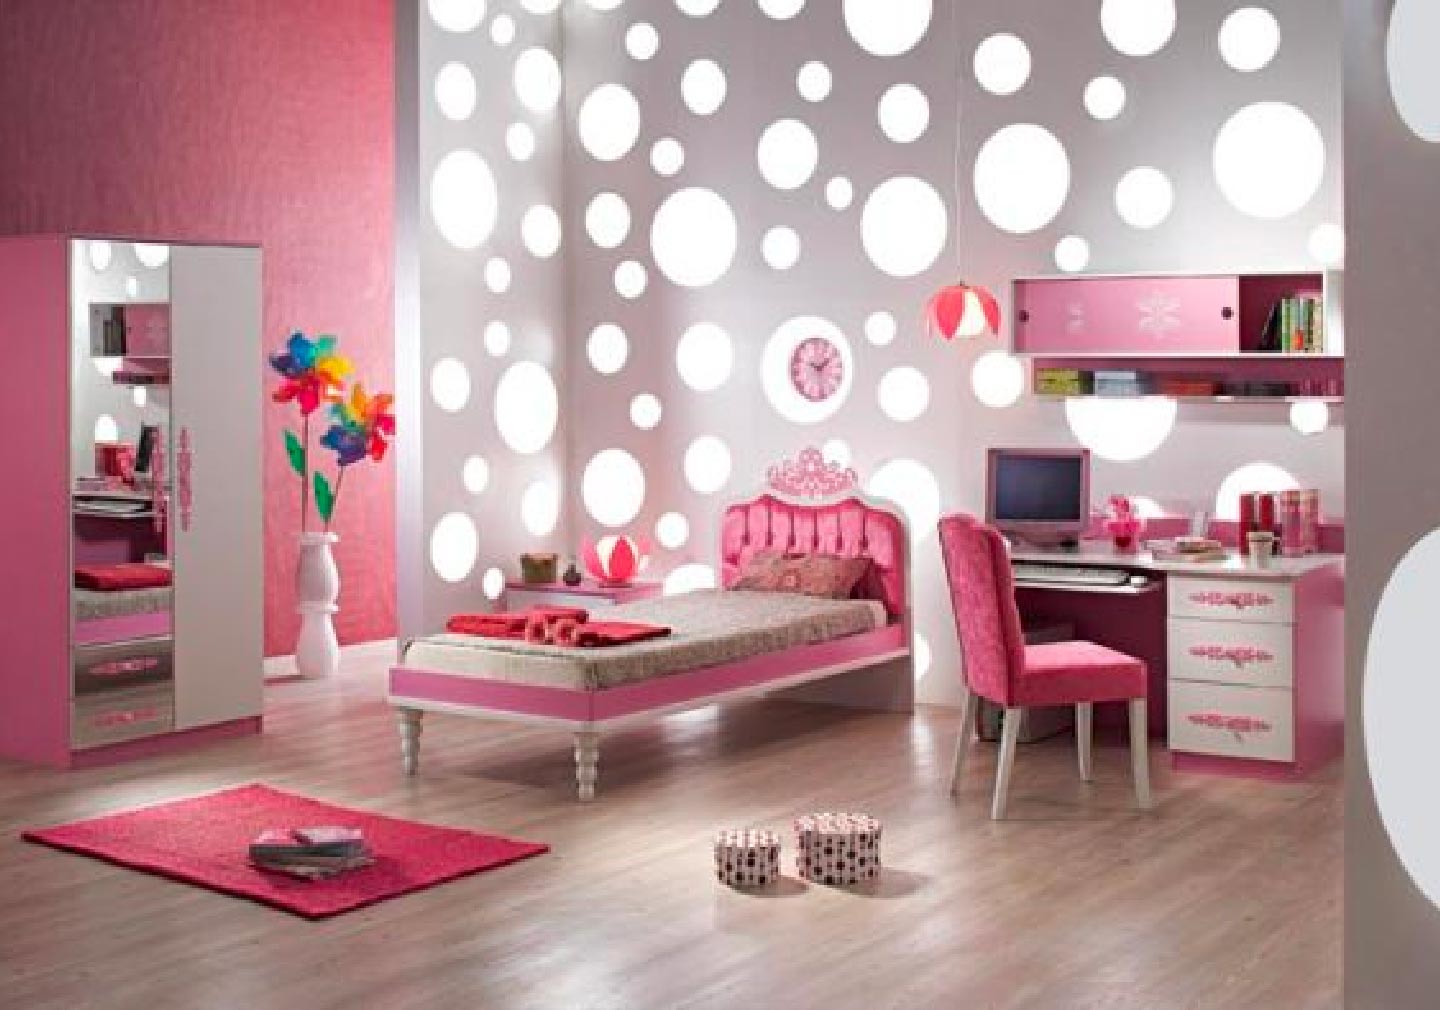 wallpapers design - Choosing a theme for your bedroom